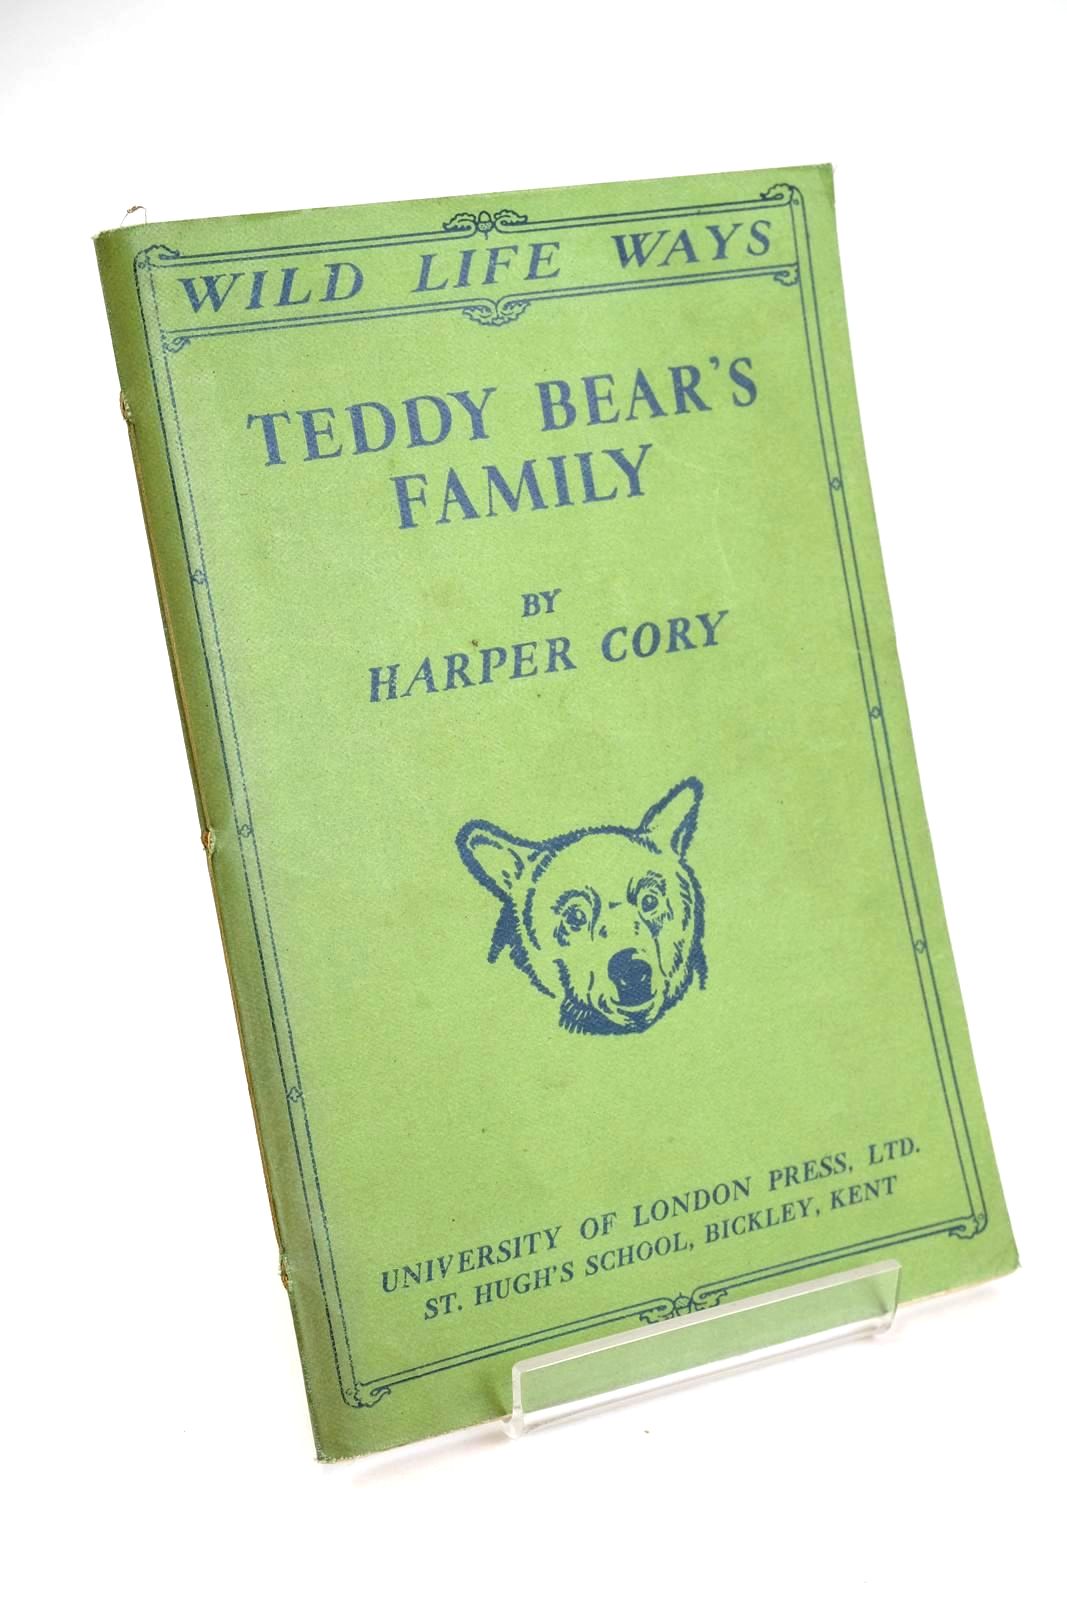 Photo of TEDDY BEAR'S FAMILY written by Cory, Harper illustrated by Parker, W.N. published by University of London Press Ltd. (STOCK CODE: 1328049)  for sale by Stella & Rose's Books